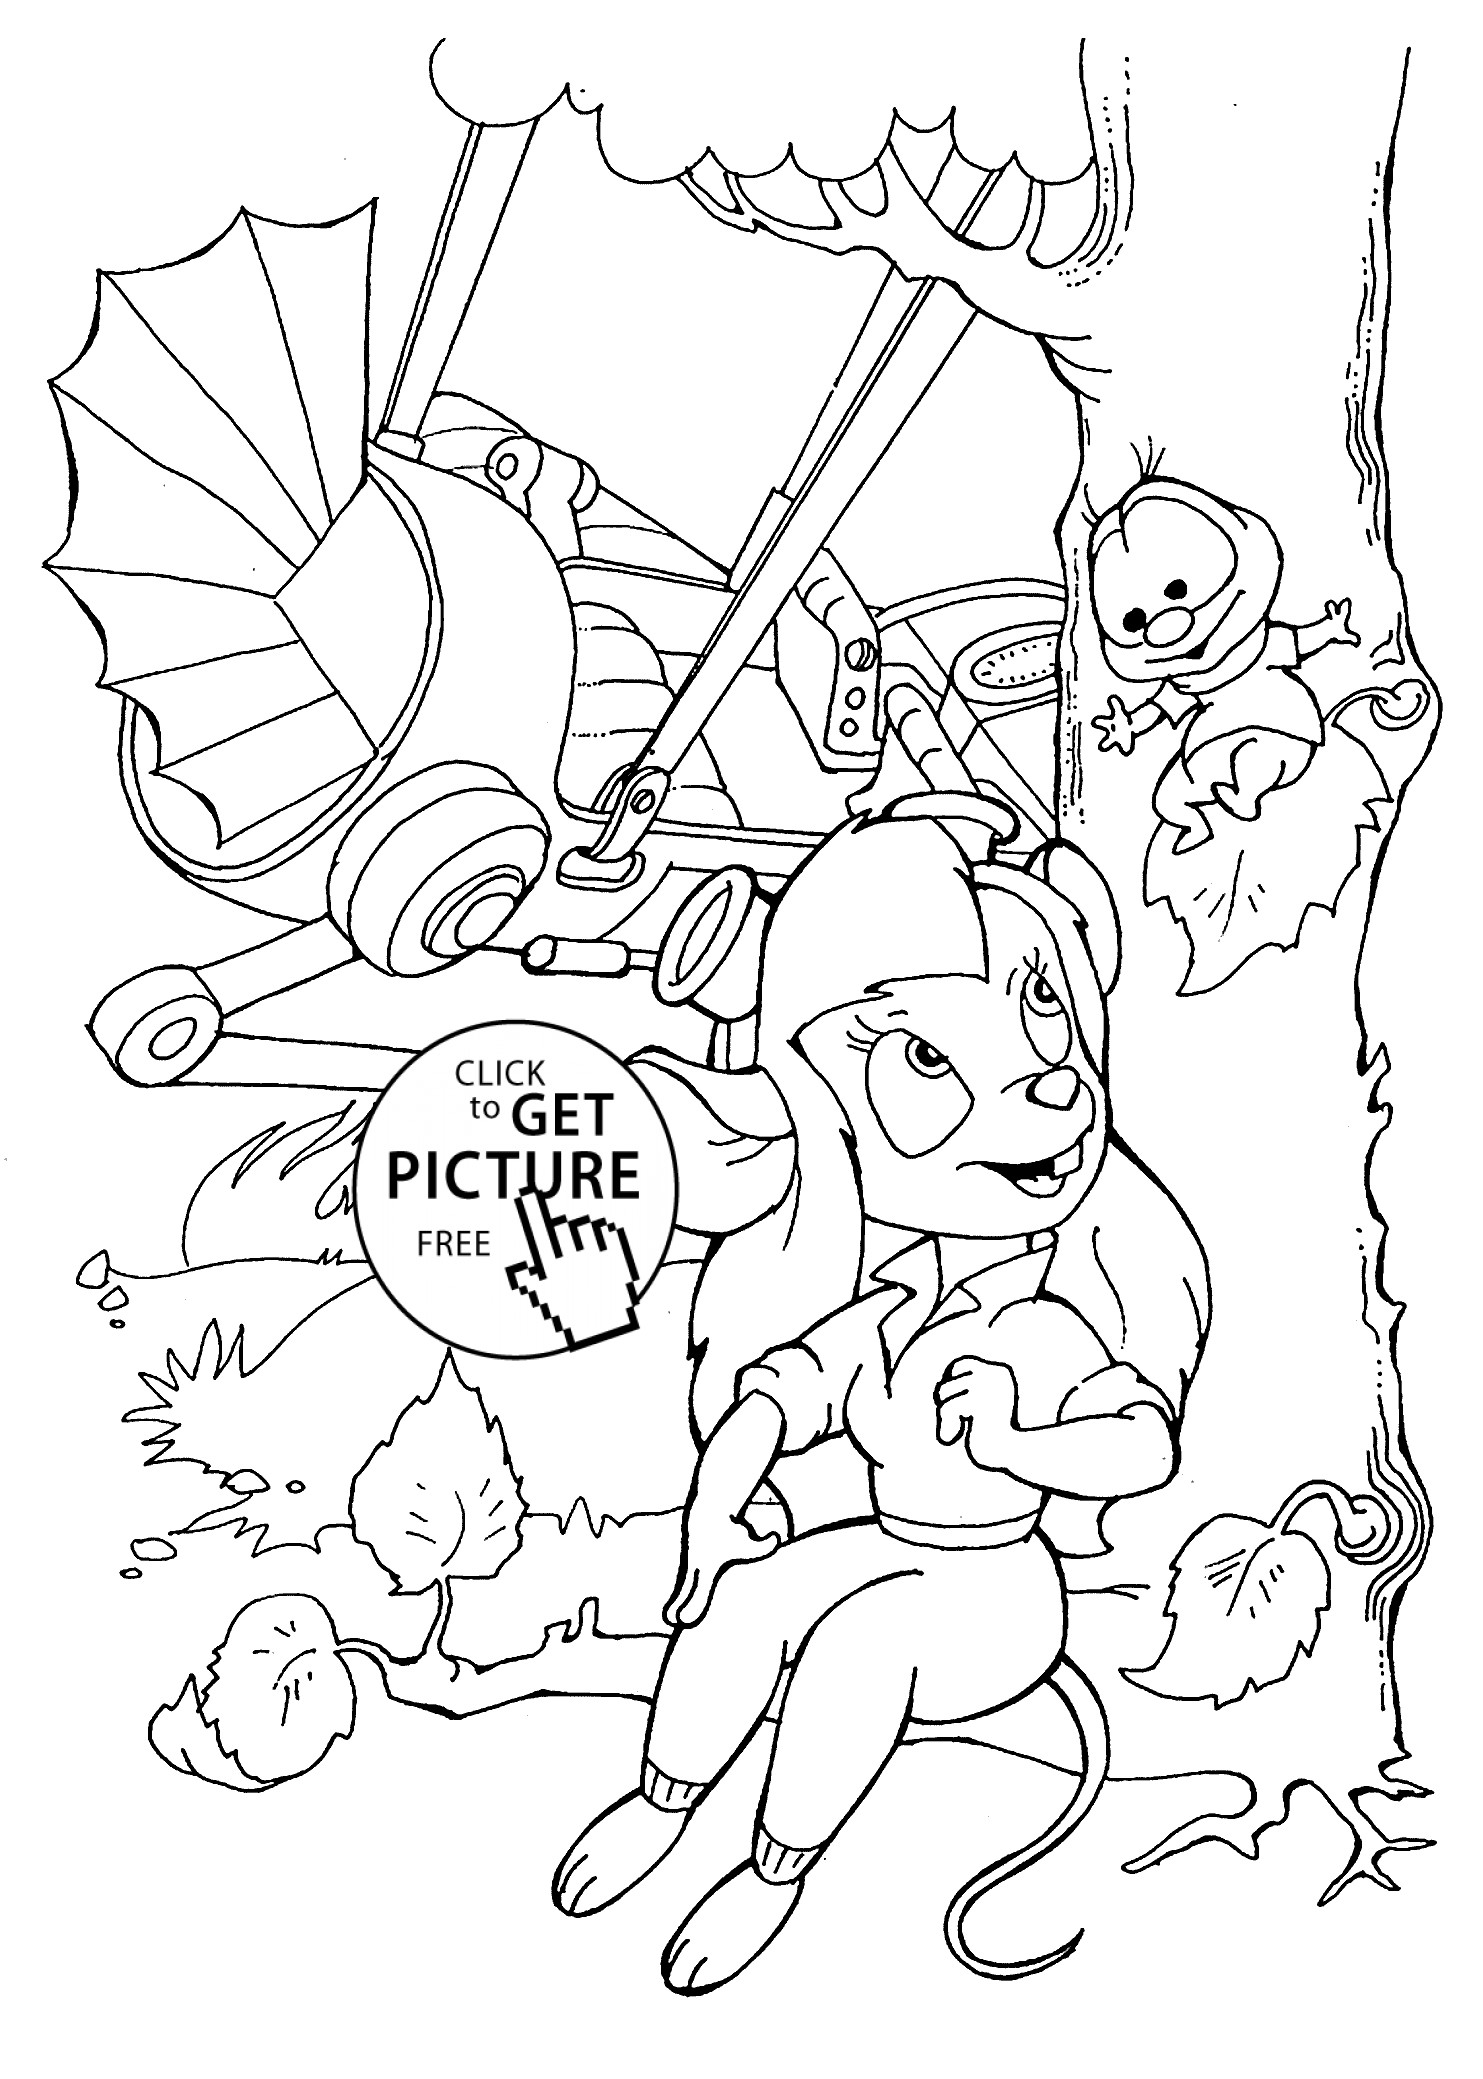 Chip And Dale Coloring Pages
 Gad from Chip and Dale coloring pages for kids